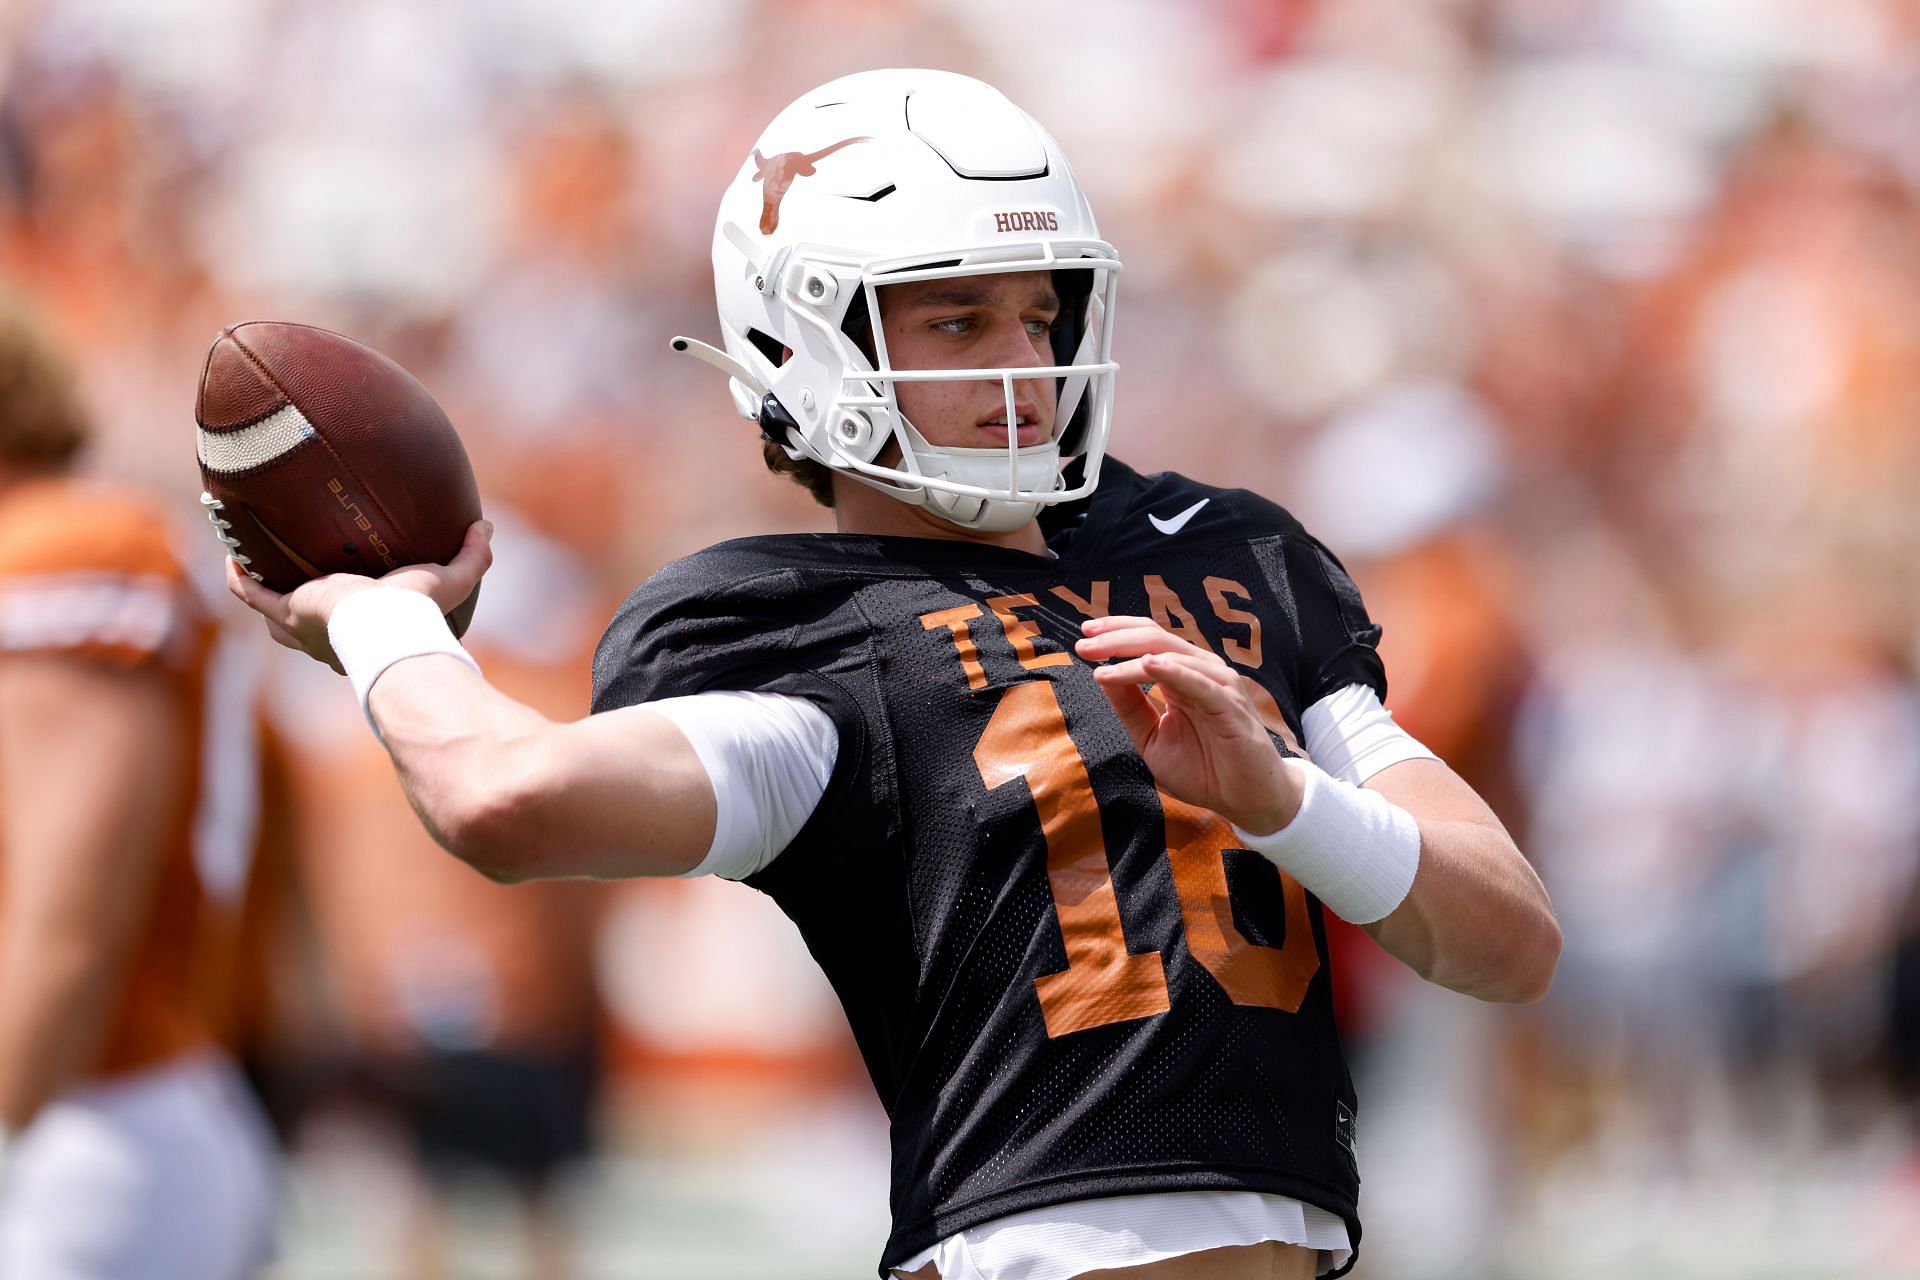 Texas Spring Football Game: Arch Manning